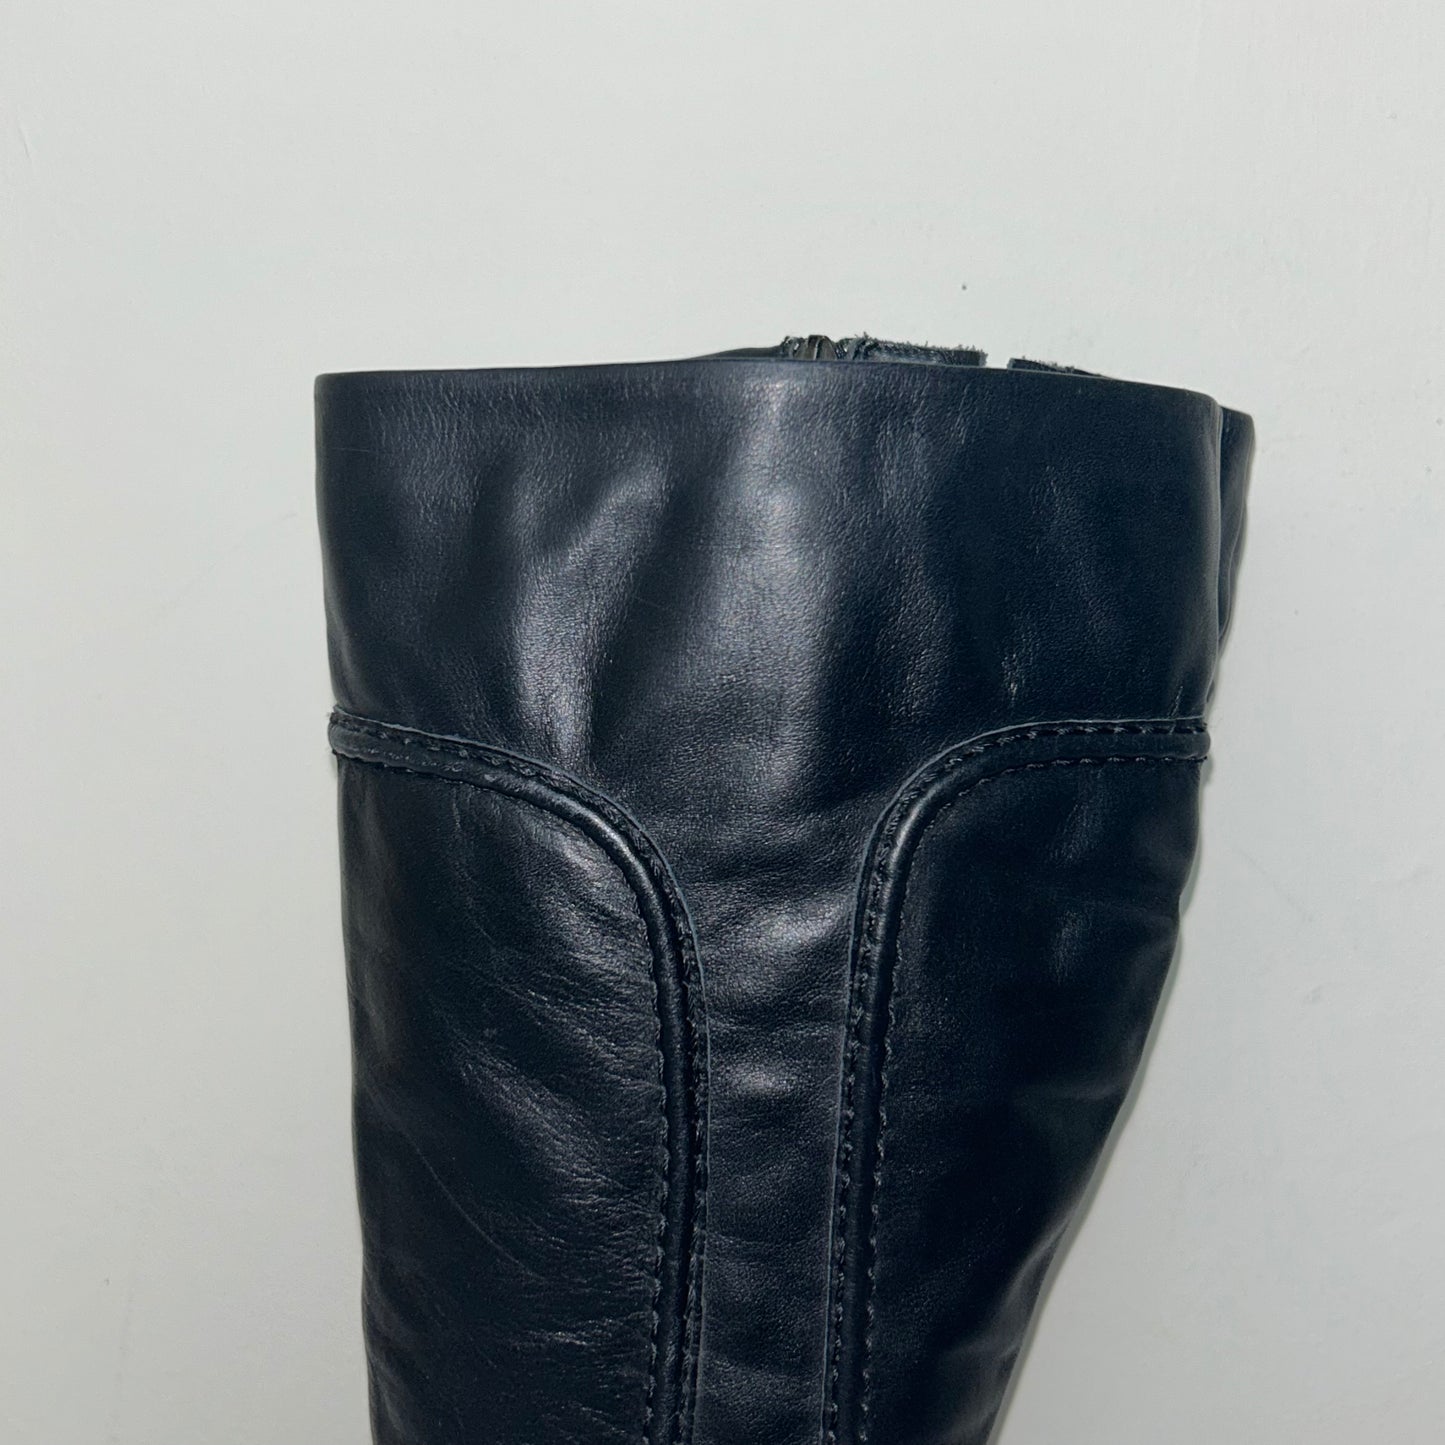 close up of black knee high boots shown on a white background